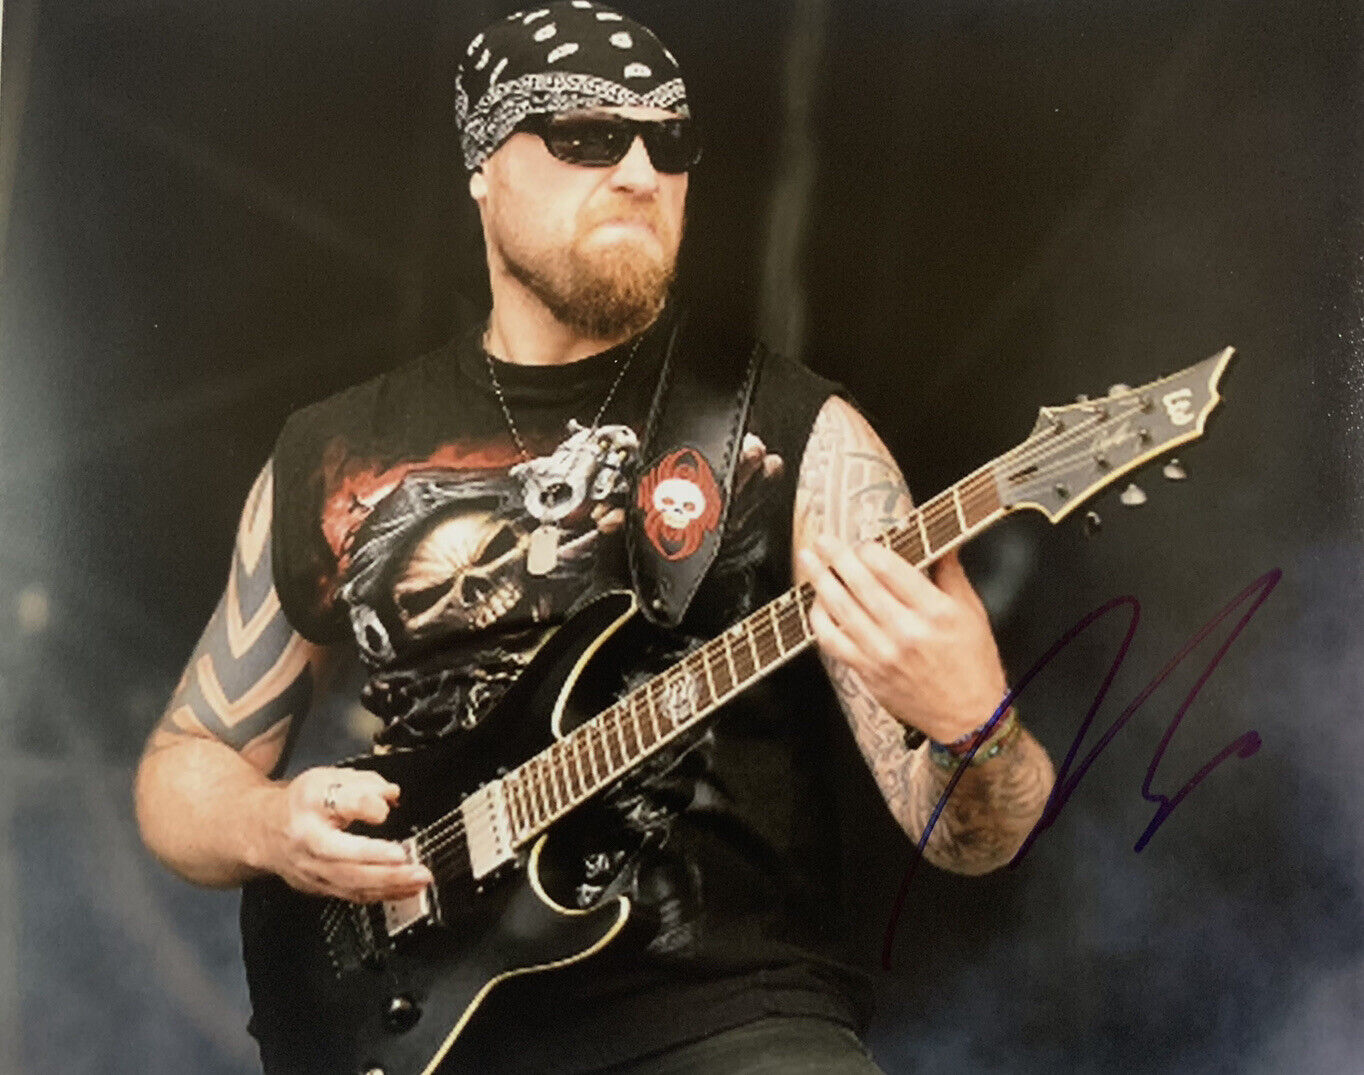 ANDY JAMES SIGNED 8x10 Photo Poster painting FIVE FINGER DEATH PUNCH GUITARIST AUTOGRAPH COA